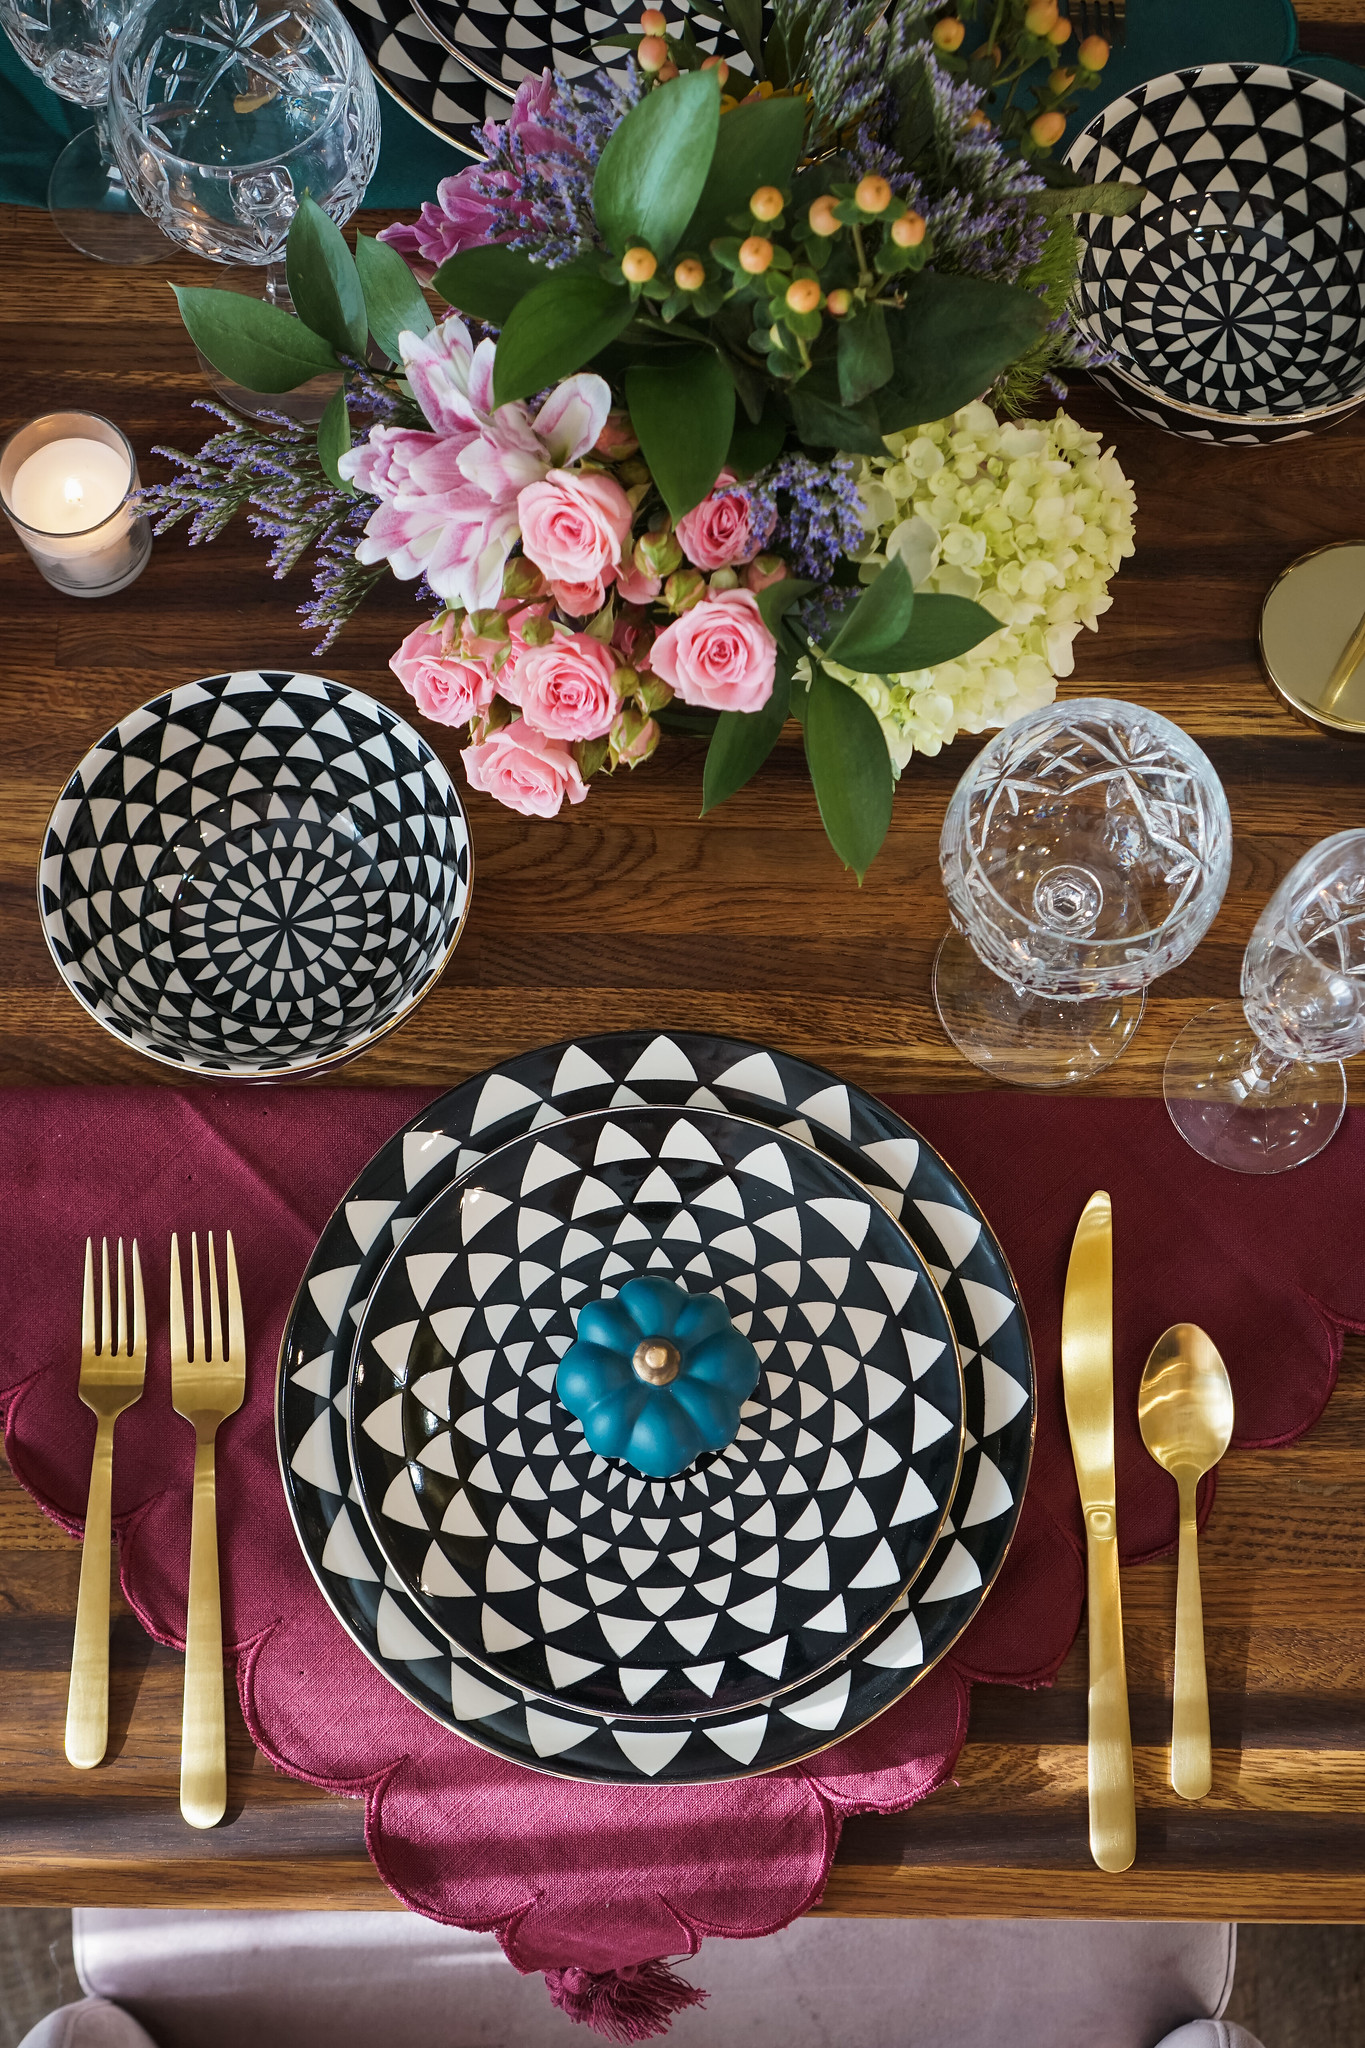 Fall Tablescapes featuring Fall Flowers, Gold Accents, Black & White Geometric Dishes | Fall Decor | Affordable Decor Ideas | Fall Table Centerpiece | Jewel Toned Table Setting